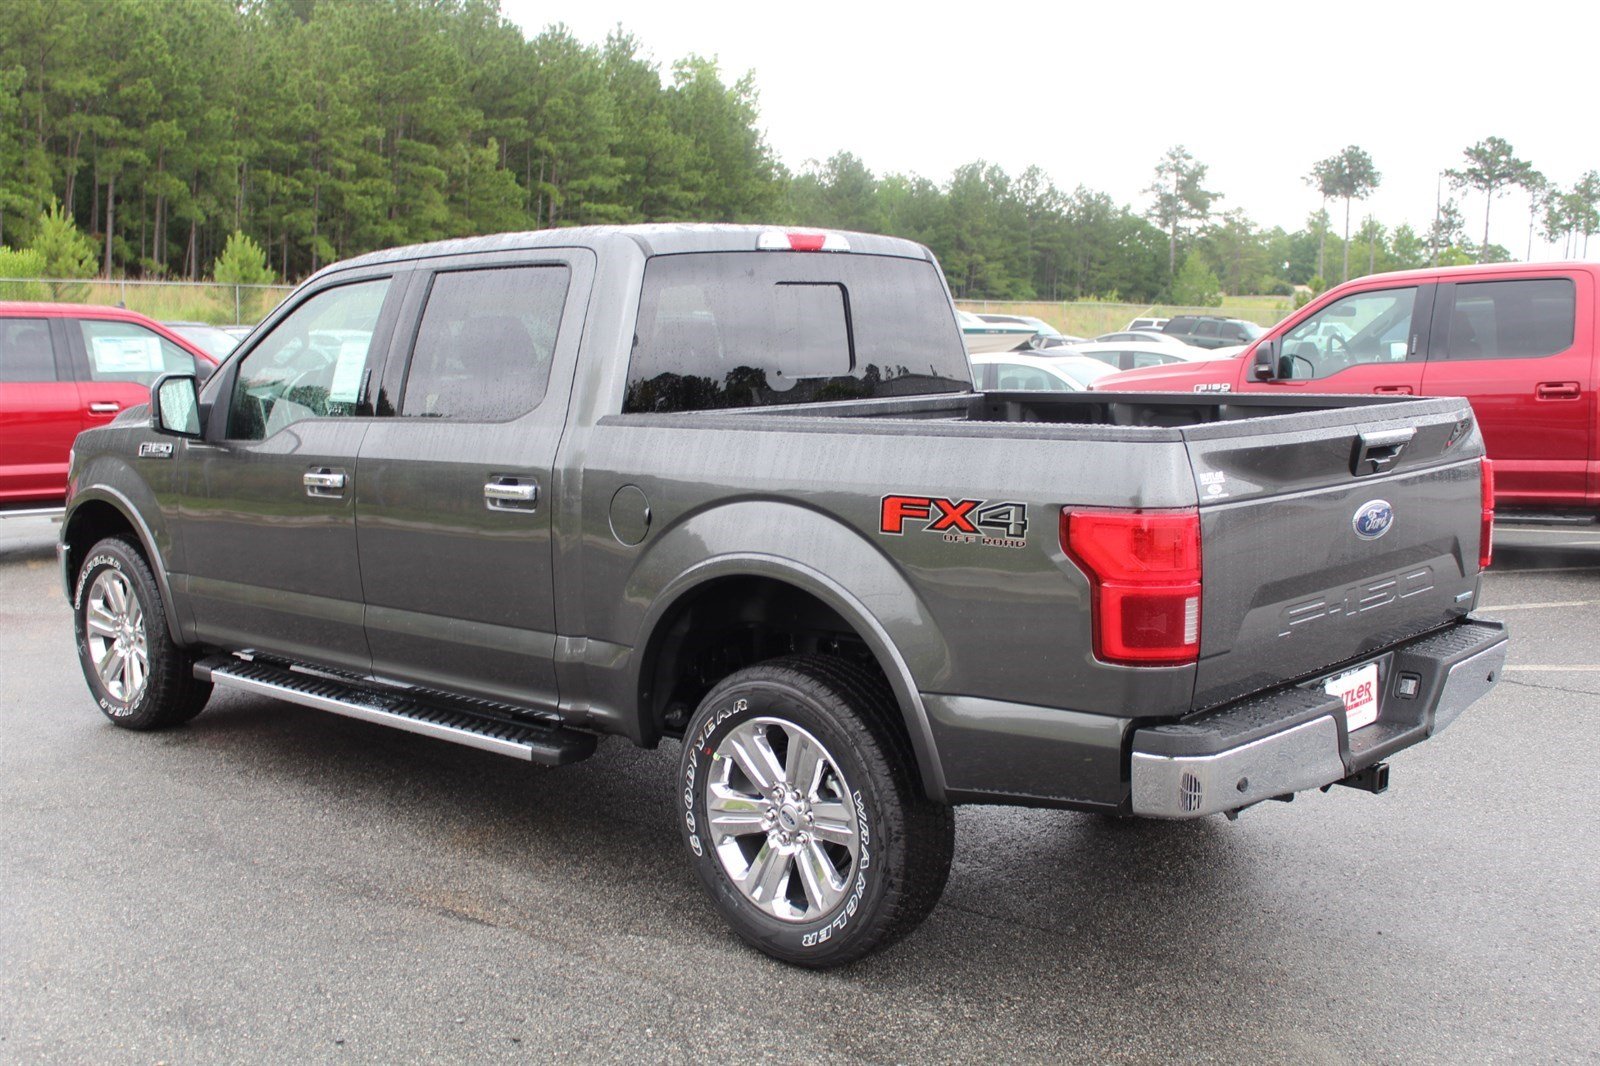 New 2019 Ford F-150 LARIAT Crew Cab Pickup in Milledgeville #F19163 ...